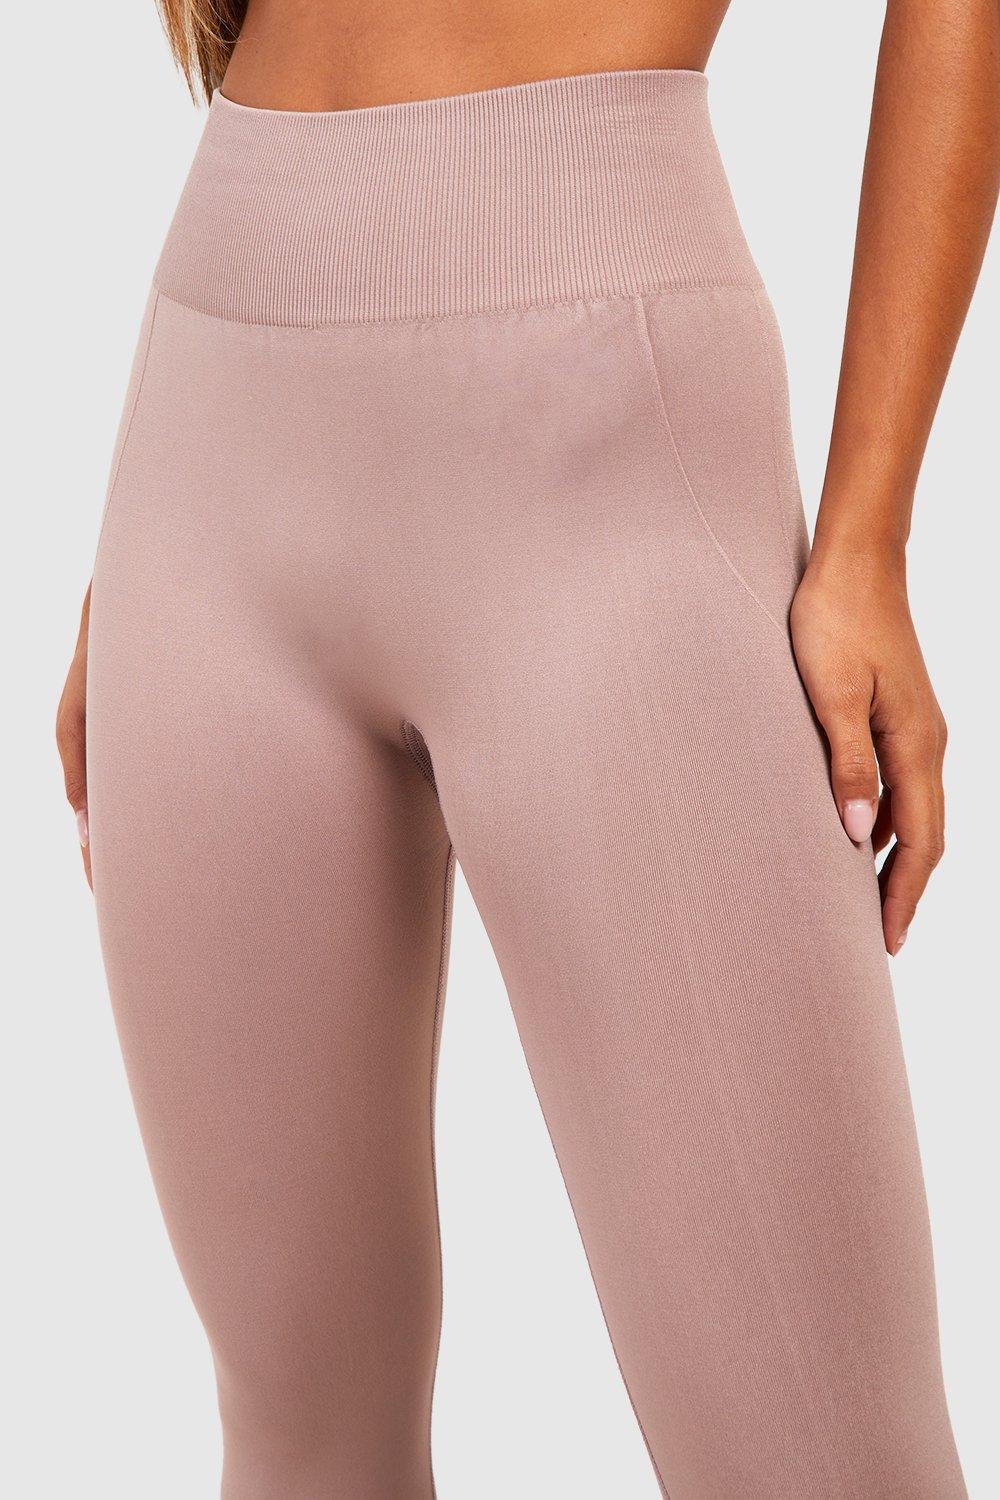 Barbie Pink, High Waisted, Front Ruching, Scrunch Leggings